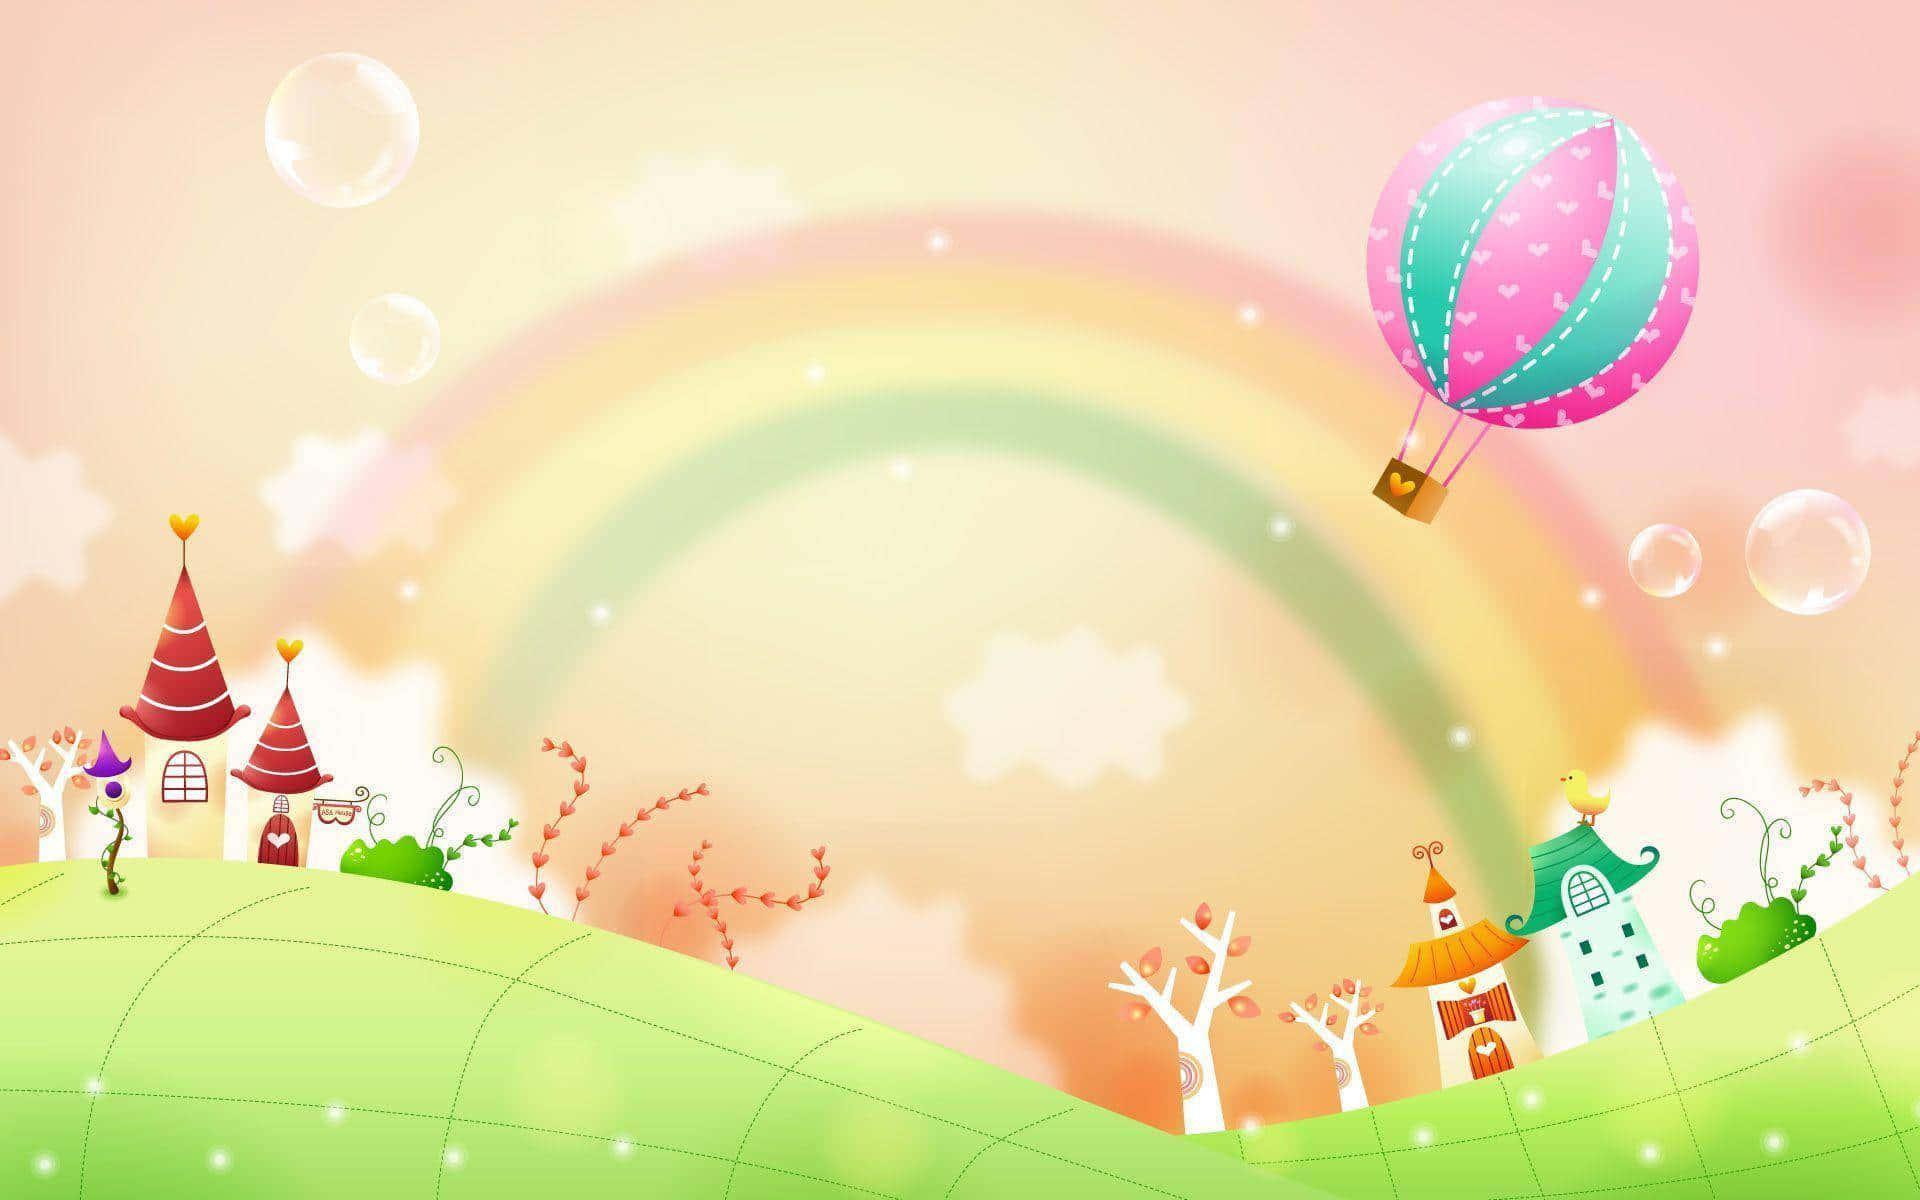 Add Colorful Style to Your Desktop with this Cute Pixel Theme Wallpaper